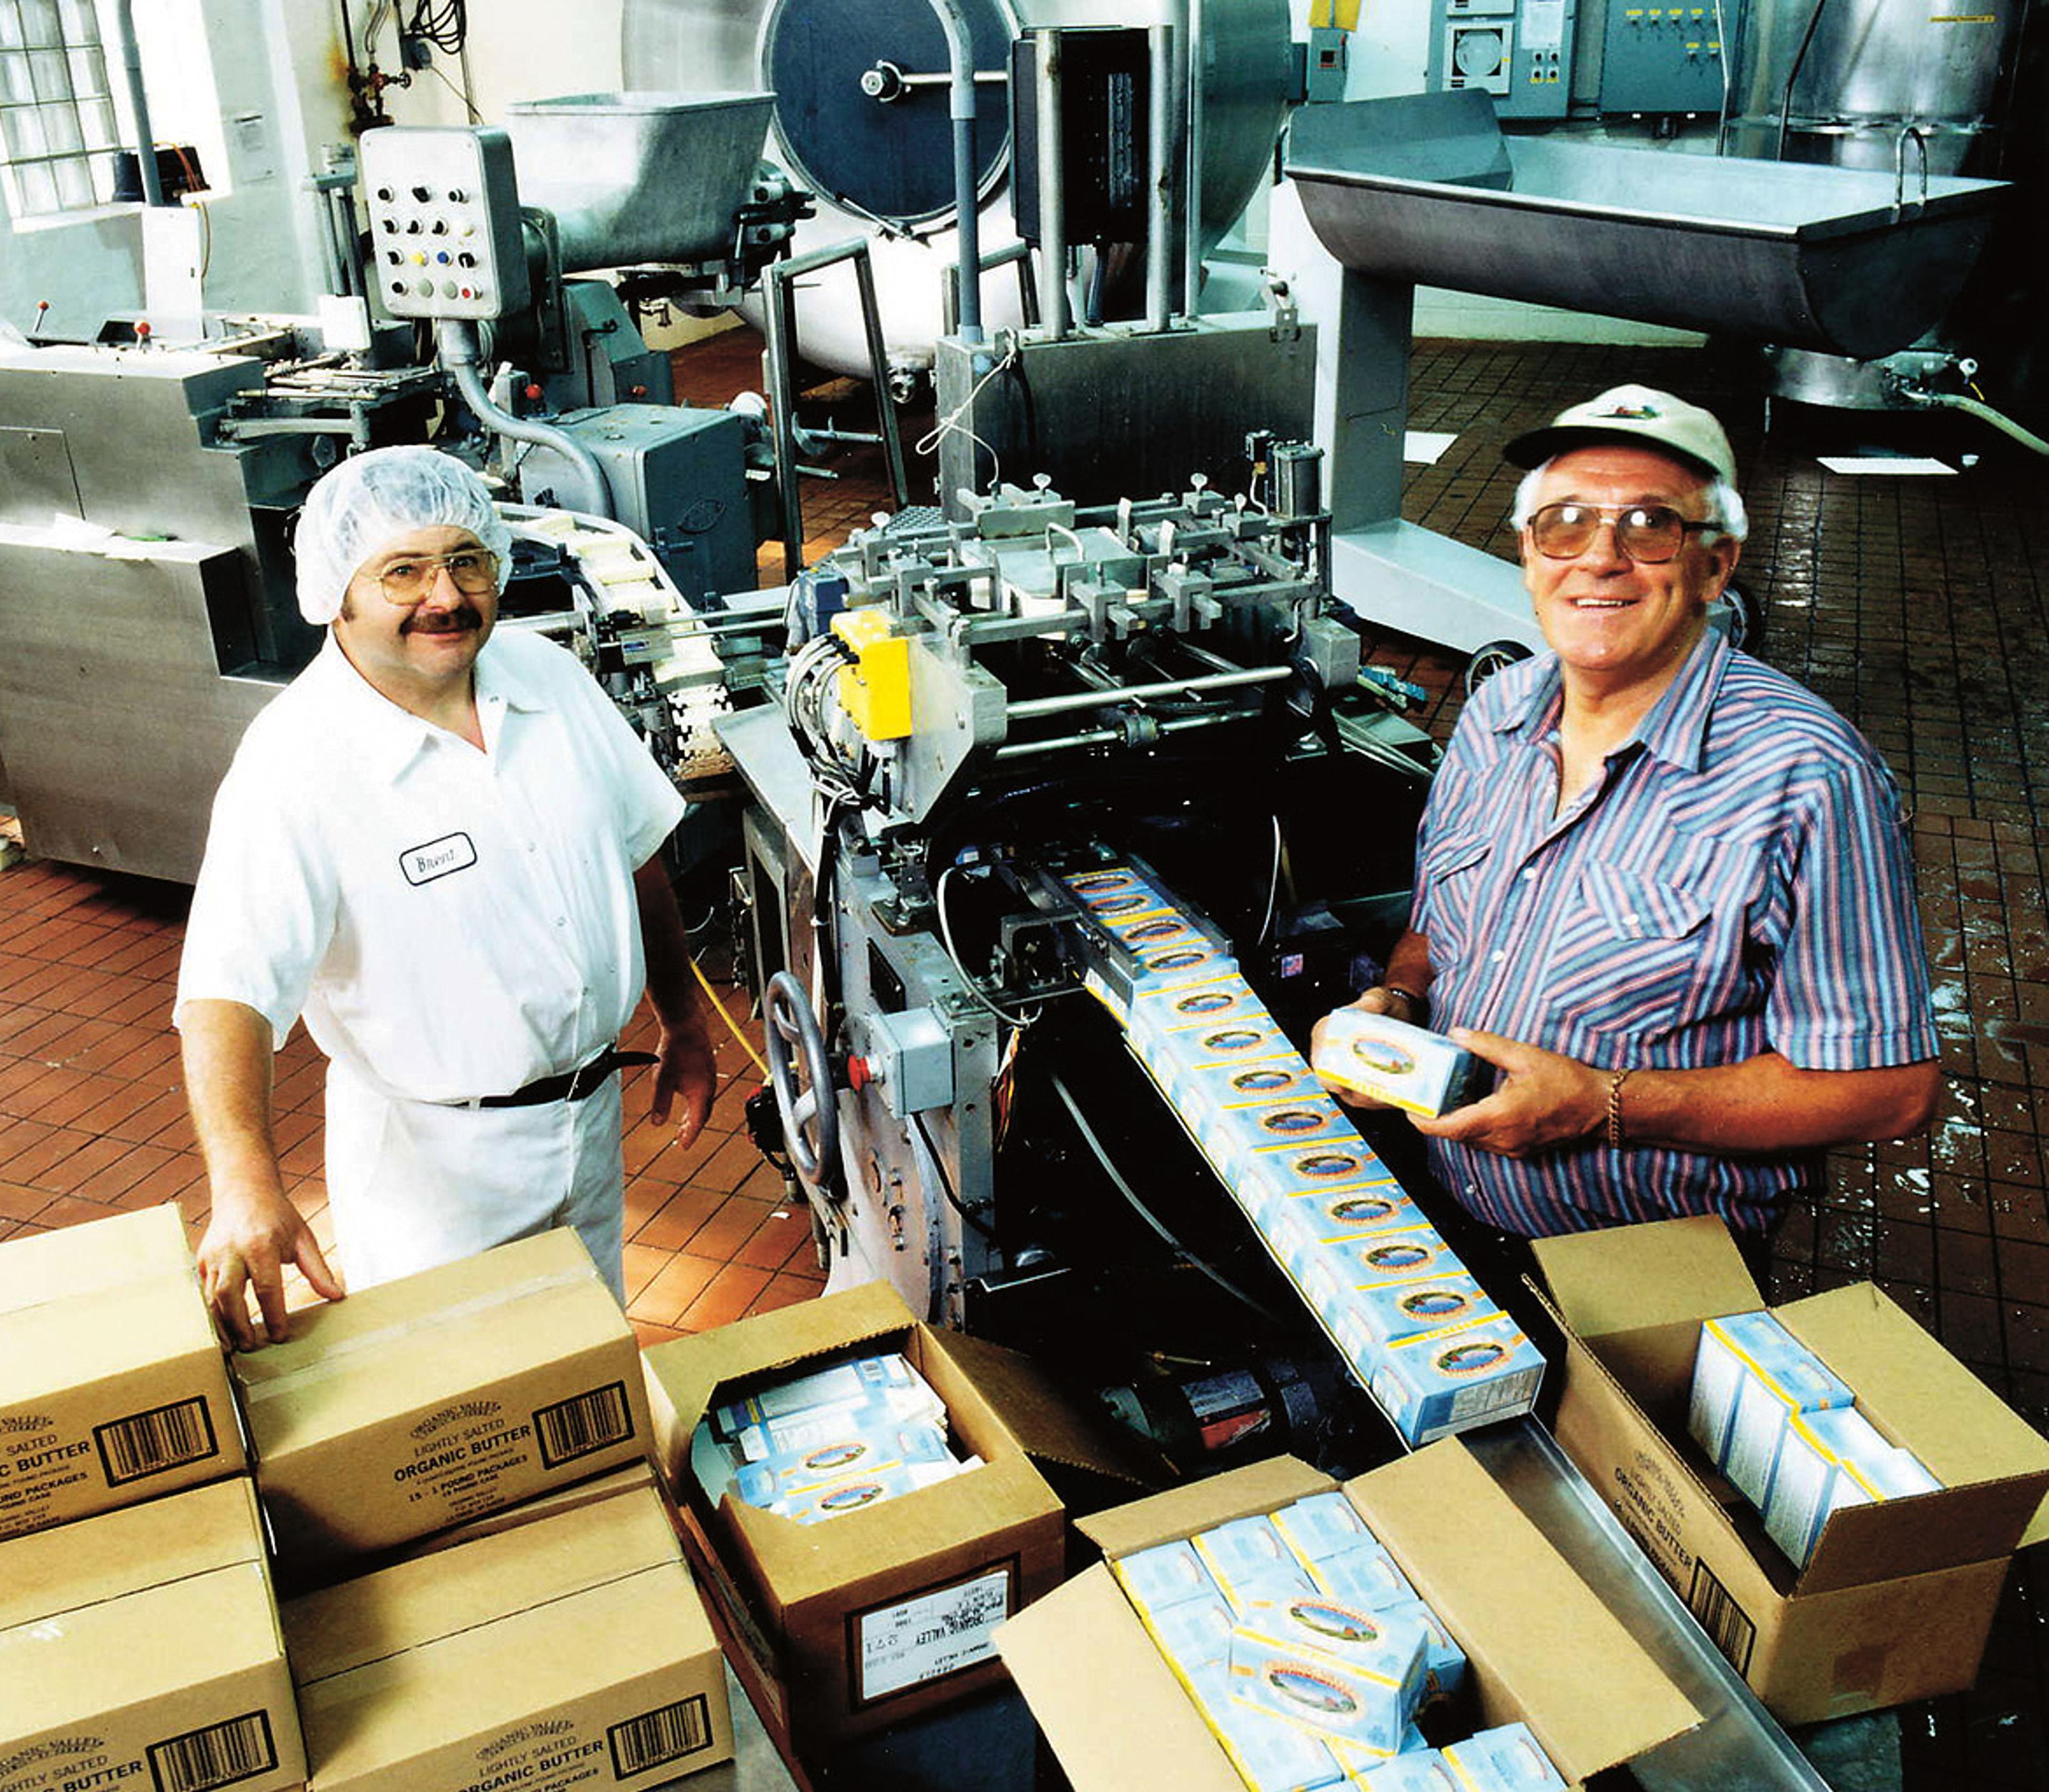 Two men stand in the creamery next to a butter packaging machine and many partially filled shipping boxes.